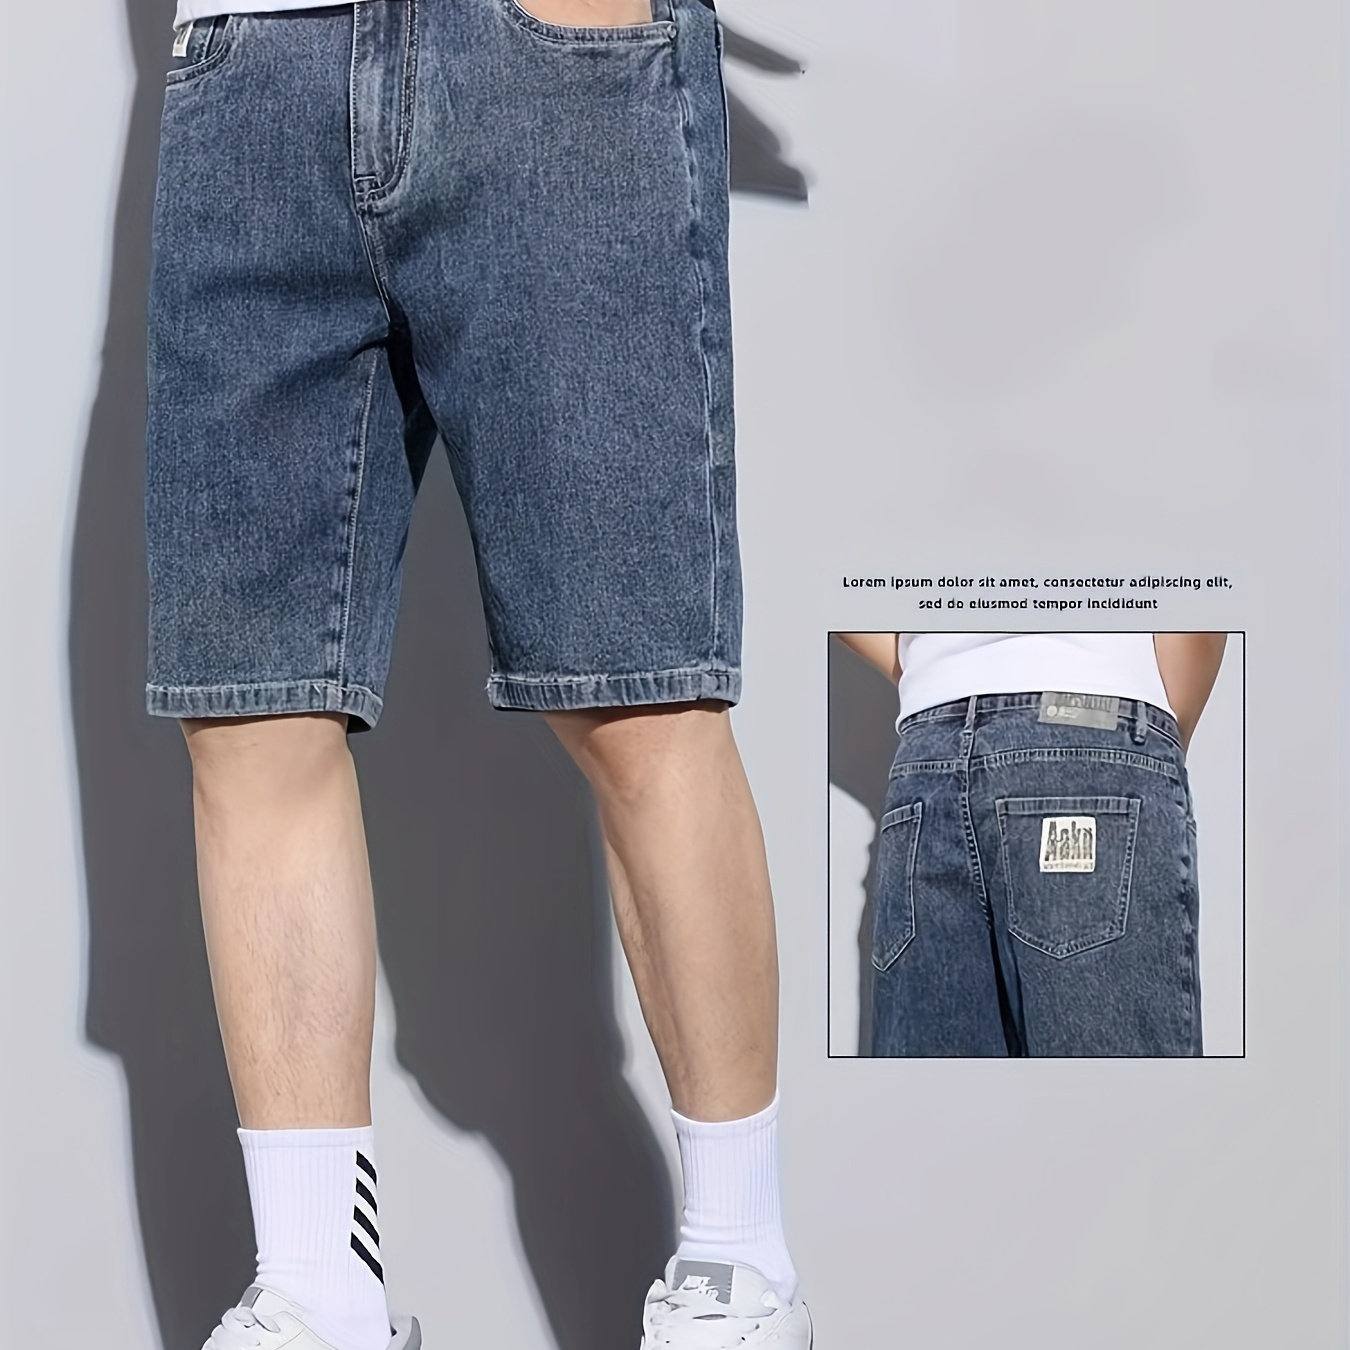 

Men's Loose Letters Print Denim Shorts With Pockets, Casual Breathable Cotton Blend Jeans For Summer Outdoor Activities Jorts, Bermuda Shorts